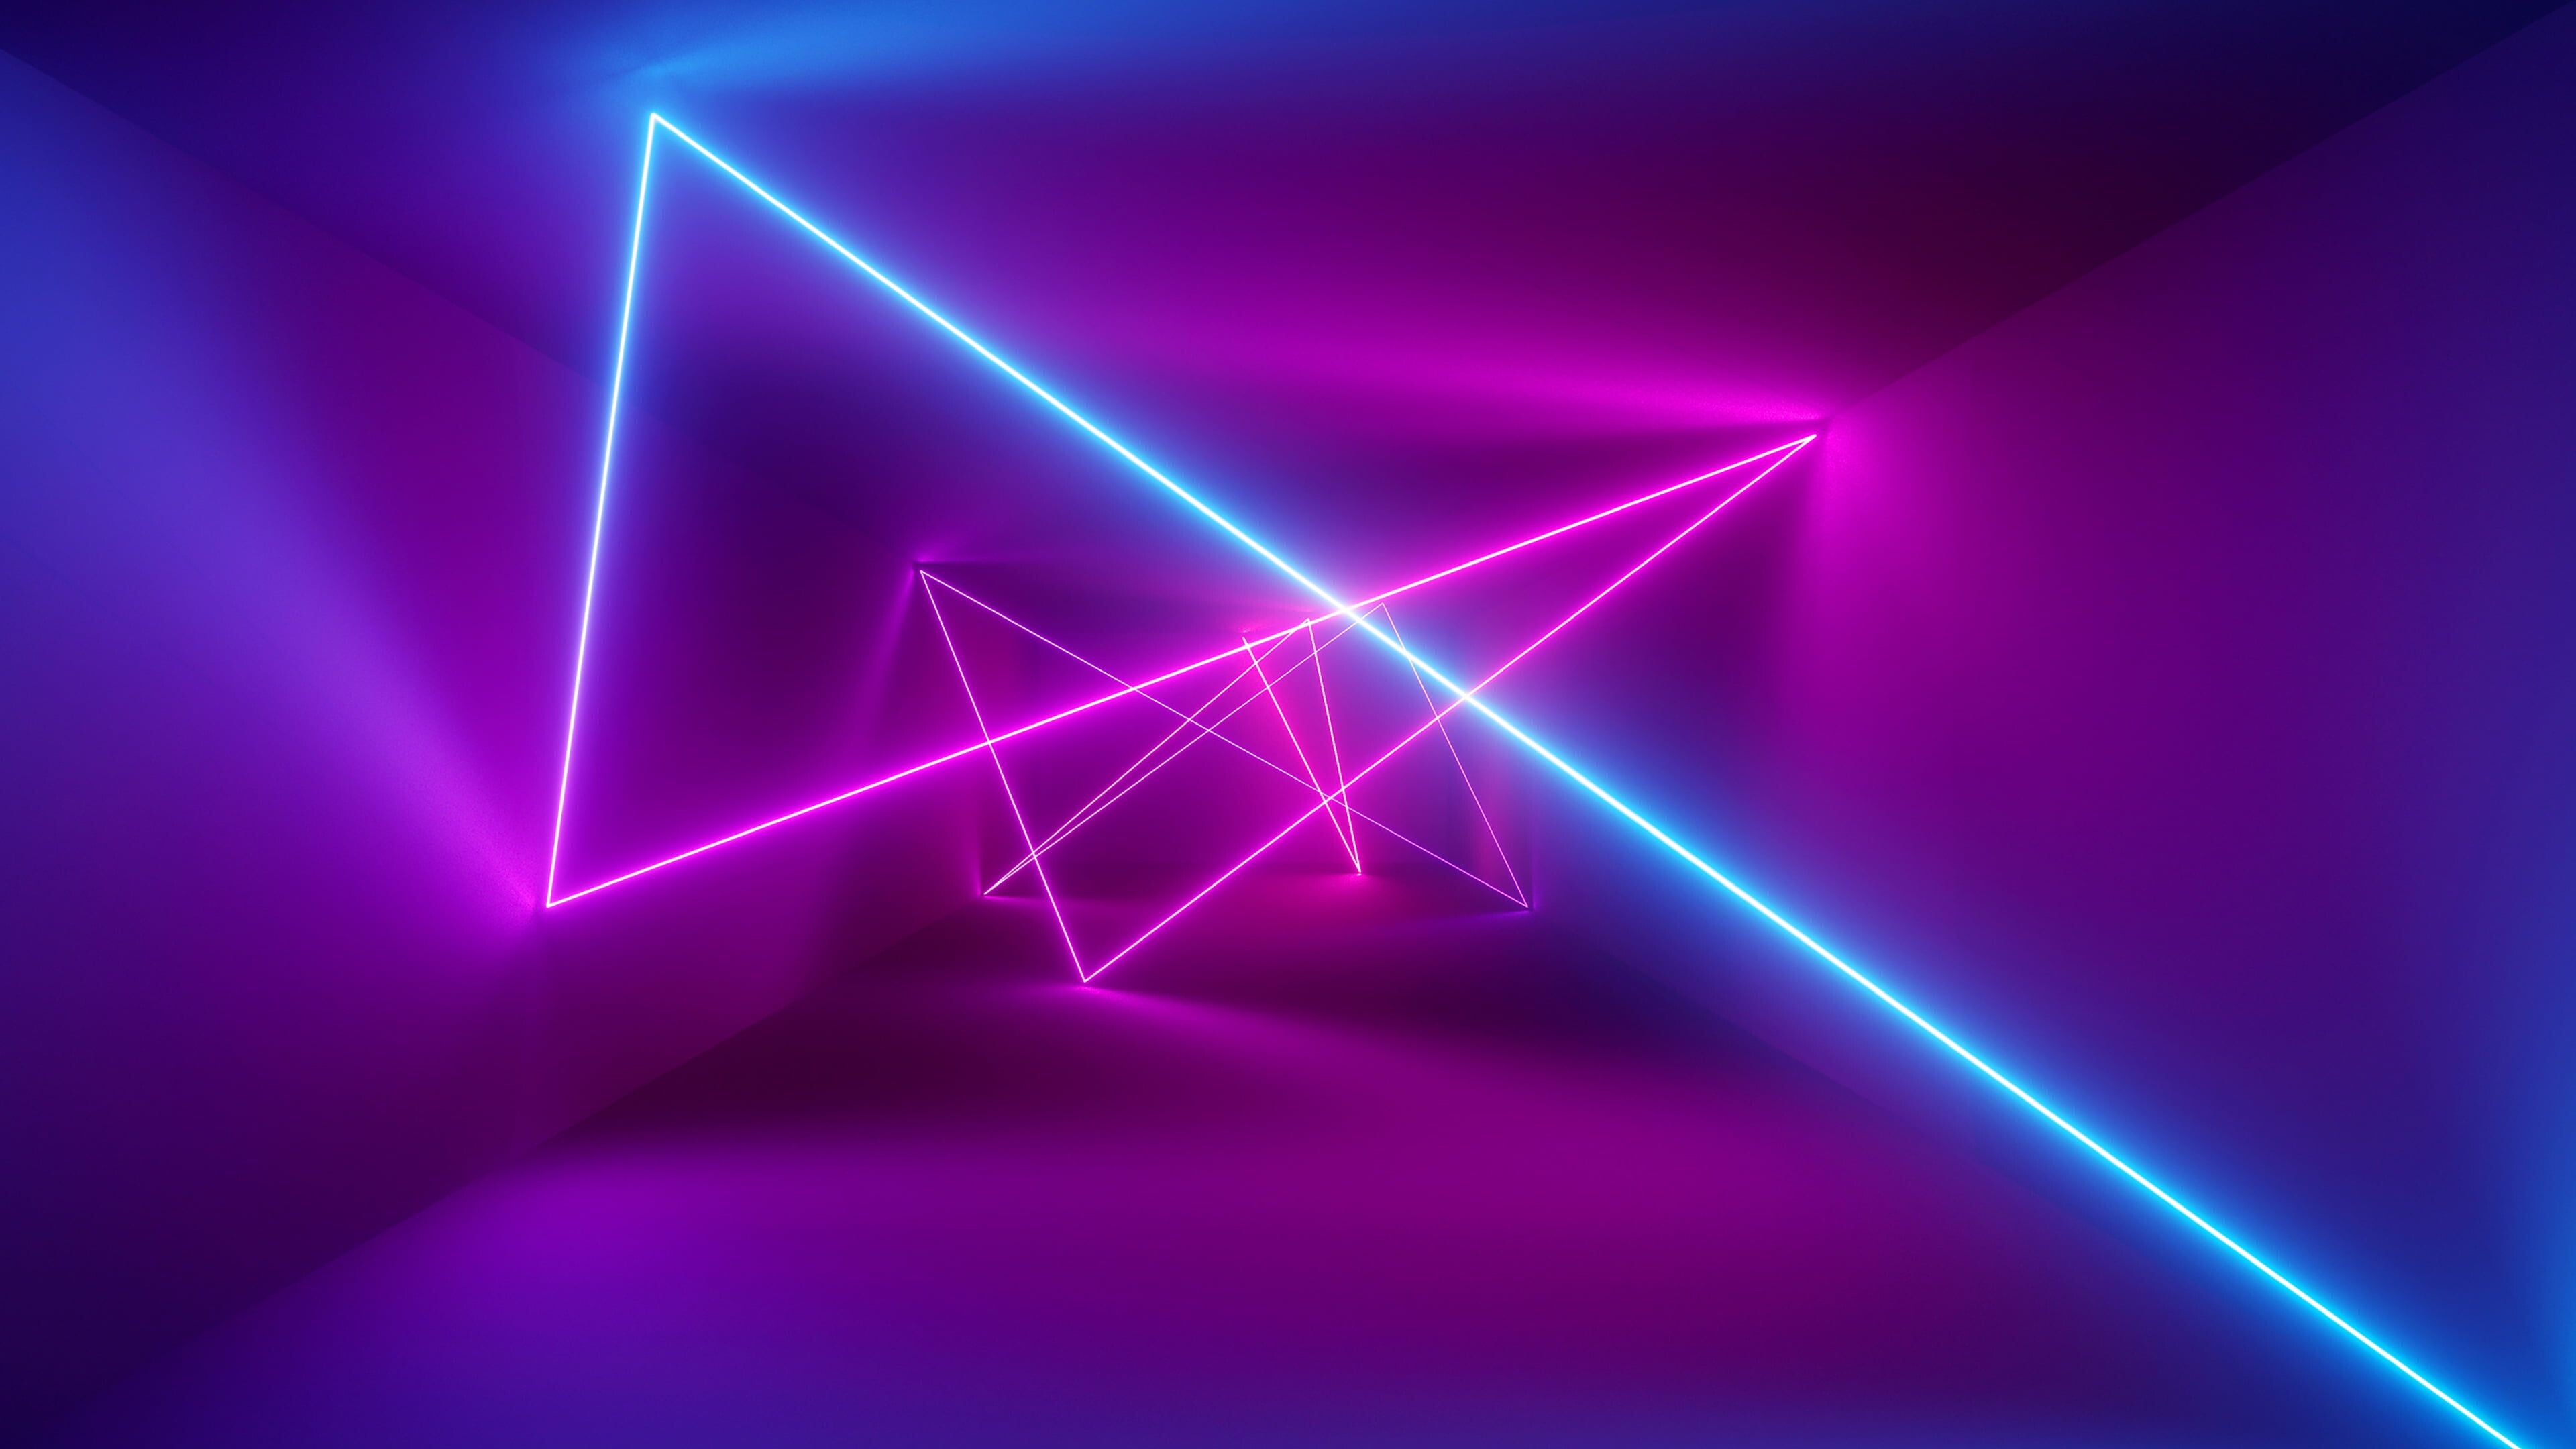 Glow in the Dark: Visual effect lighting, Neon triangles, Magenta, Colorful tunnel. 3840x2160 4K Wallpaper.